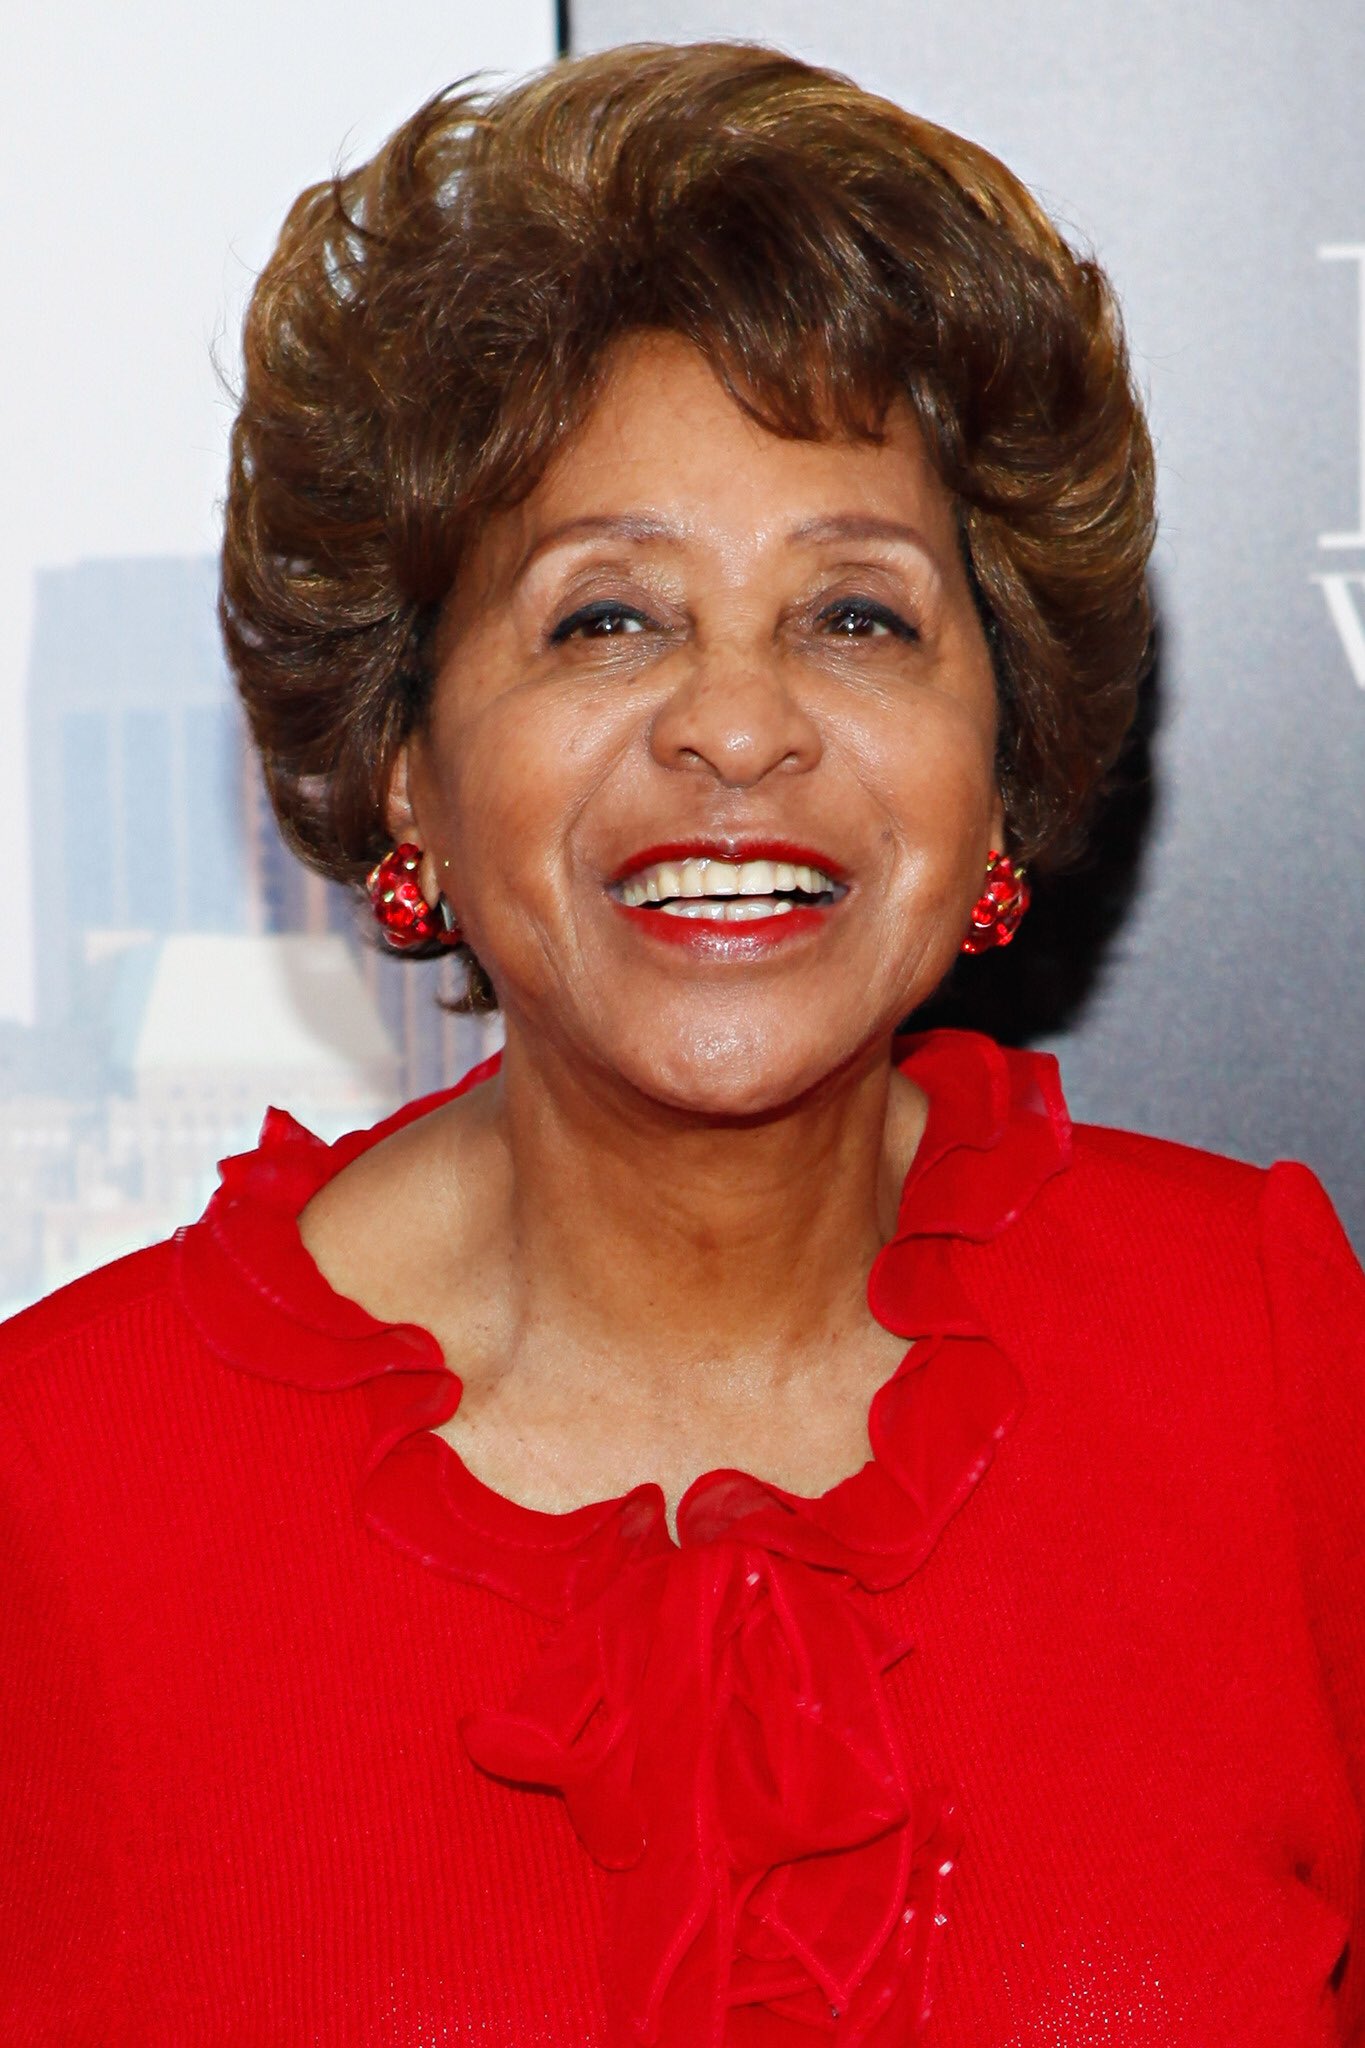 Wishing a happy 92nd birthday to this absolute legend.  The incomparable Marla Gibbs 